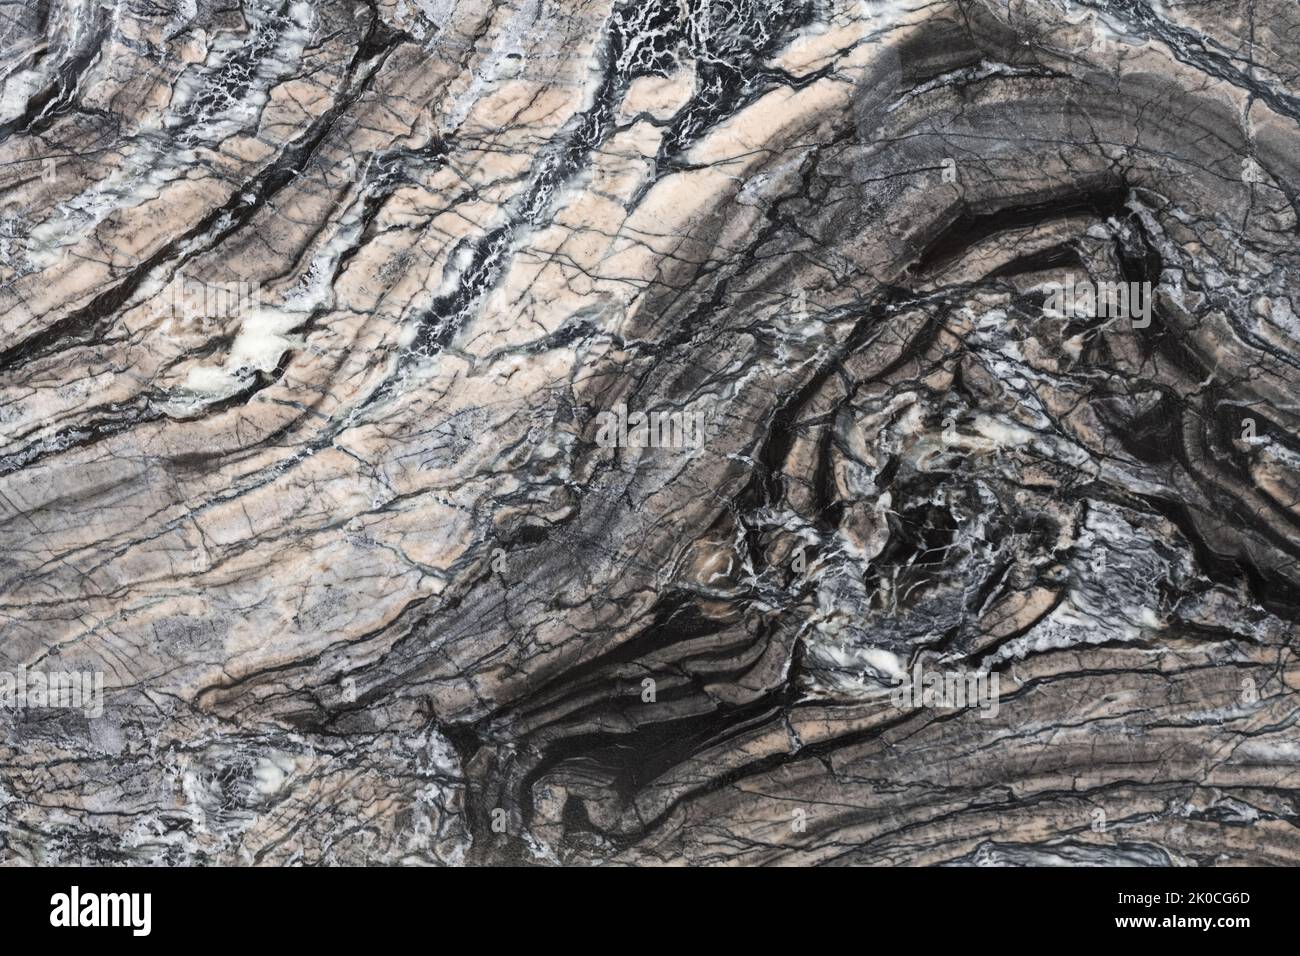 Blackwood lether natural marble stone texture, photo of slab. Soft Italian stone background for interior, exterior home decoration, floor tiles and Stock Photo